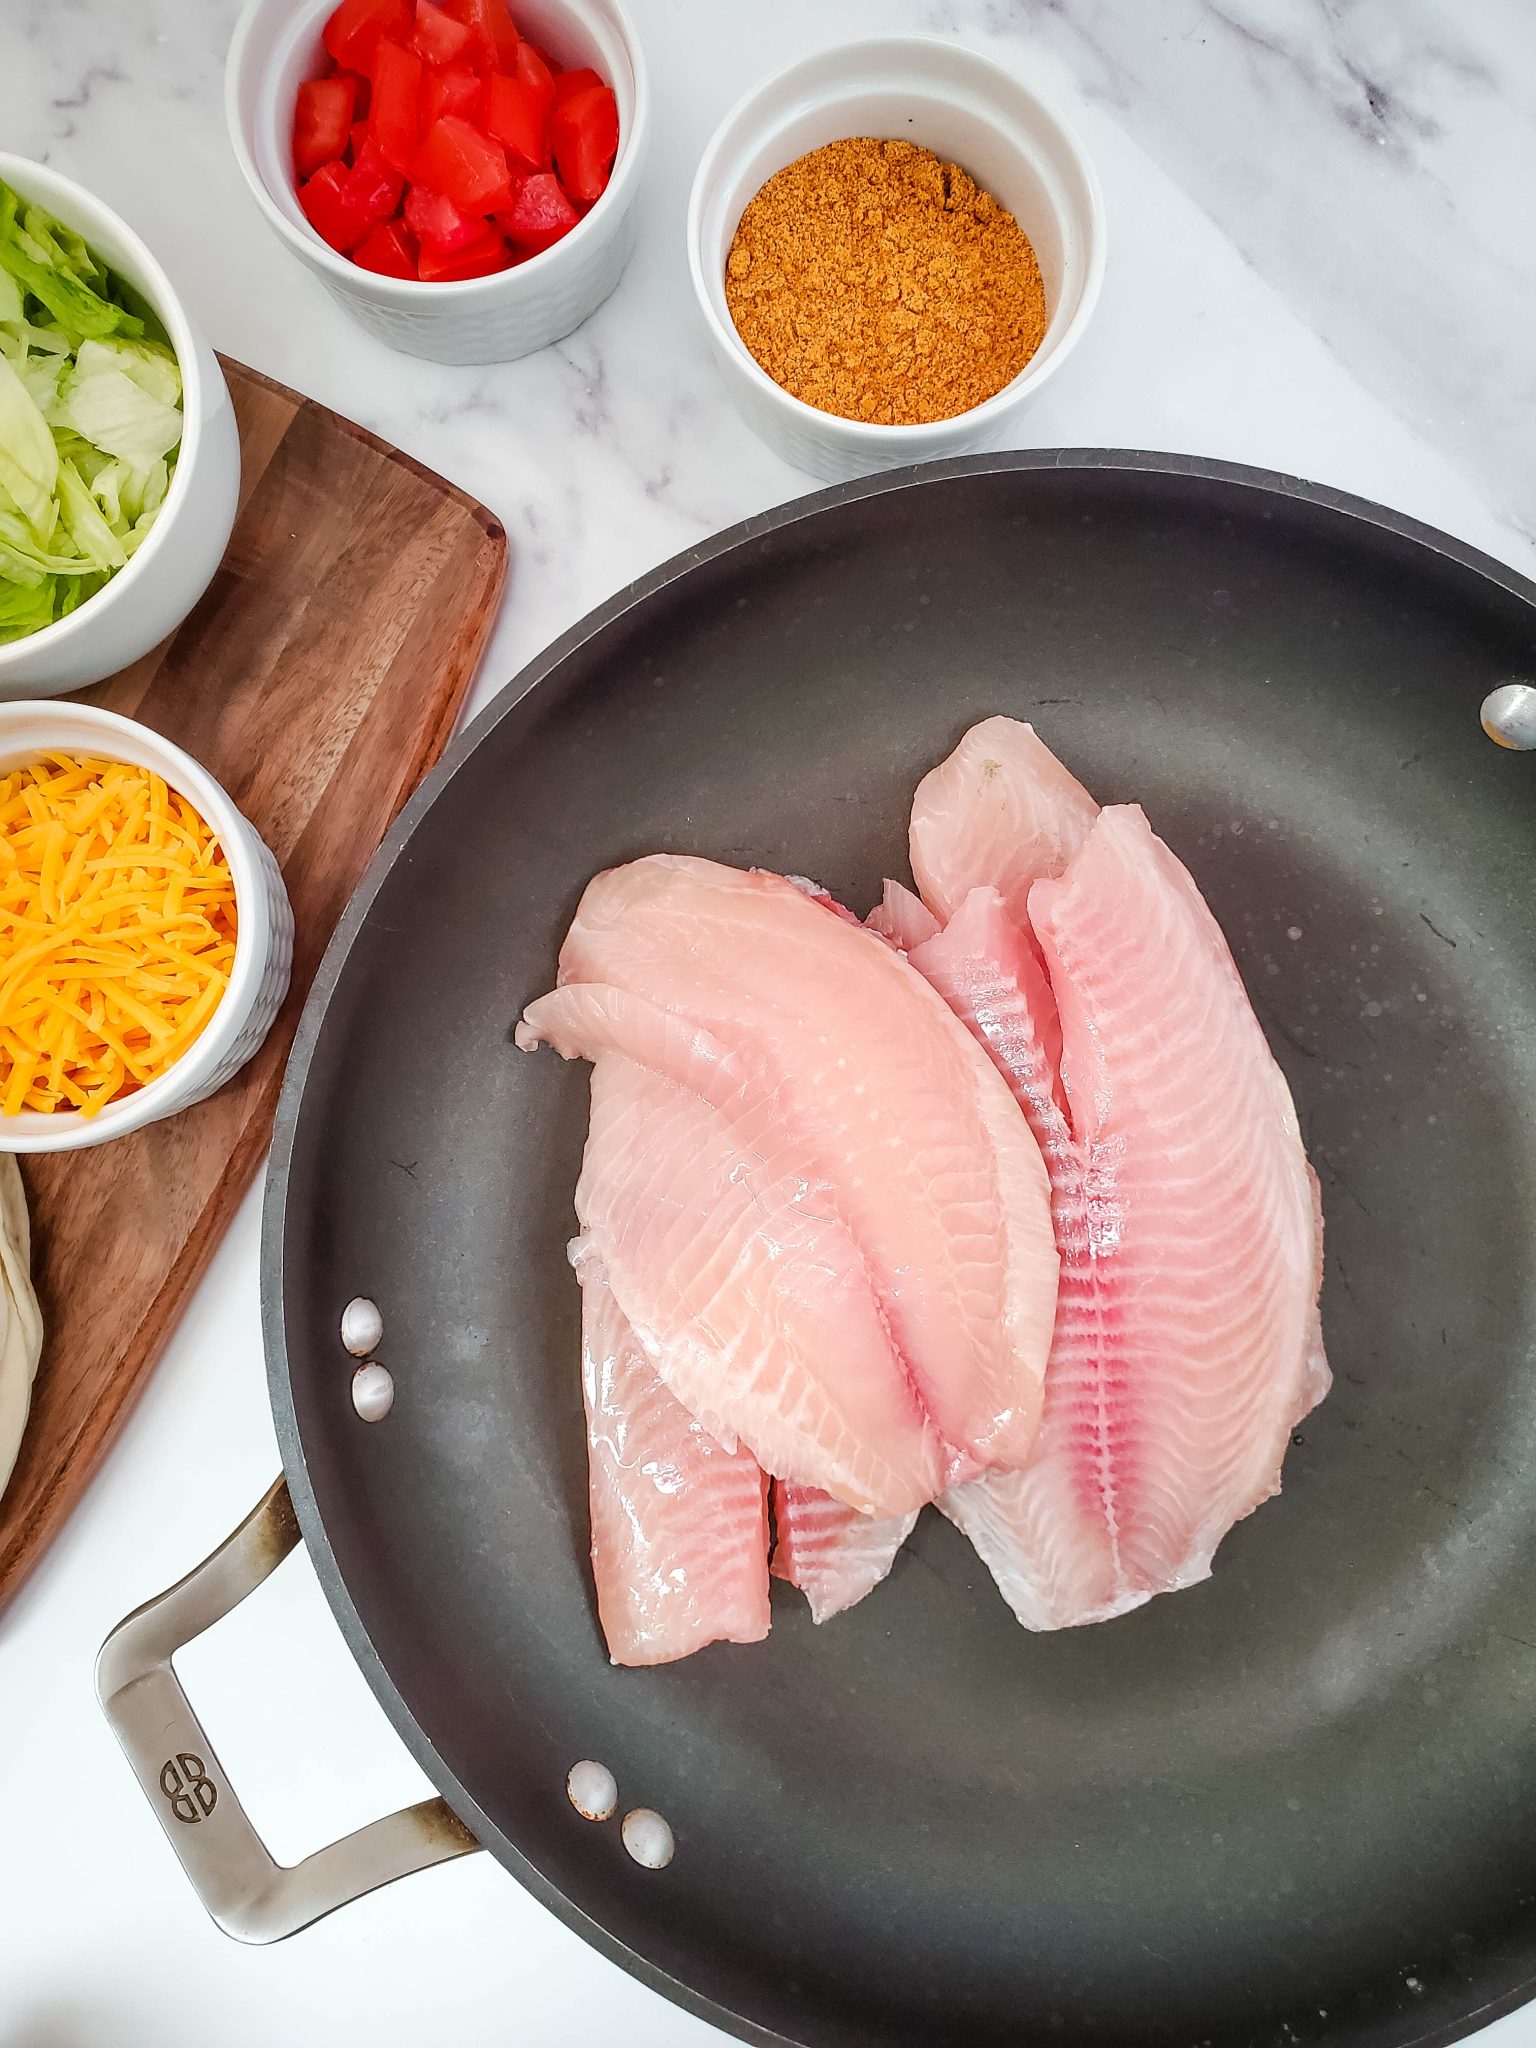 Step-by-step instructions to make fish tacos